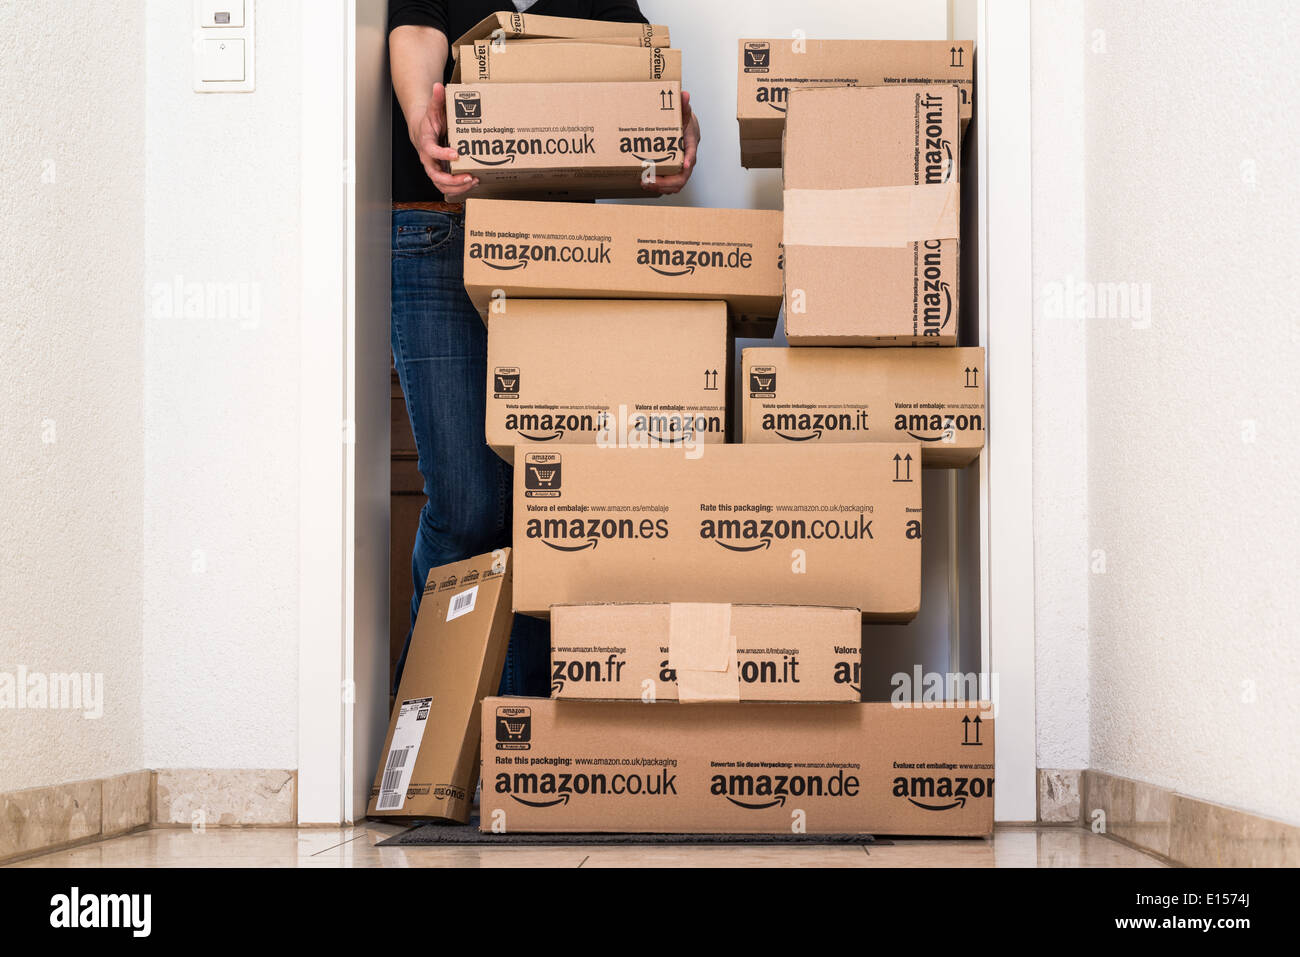 A woman is horrified by a large stack of parcels by Amazon.com in different sizes waiting in front of the entrance door to her Stock Photo